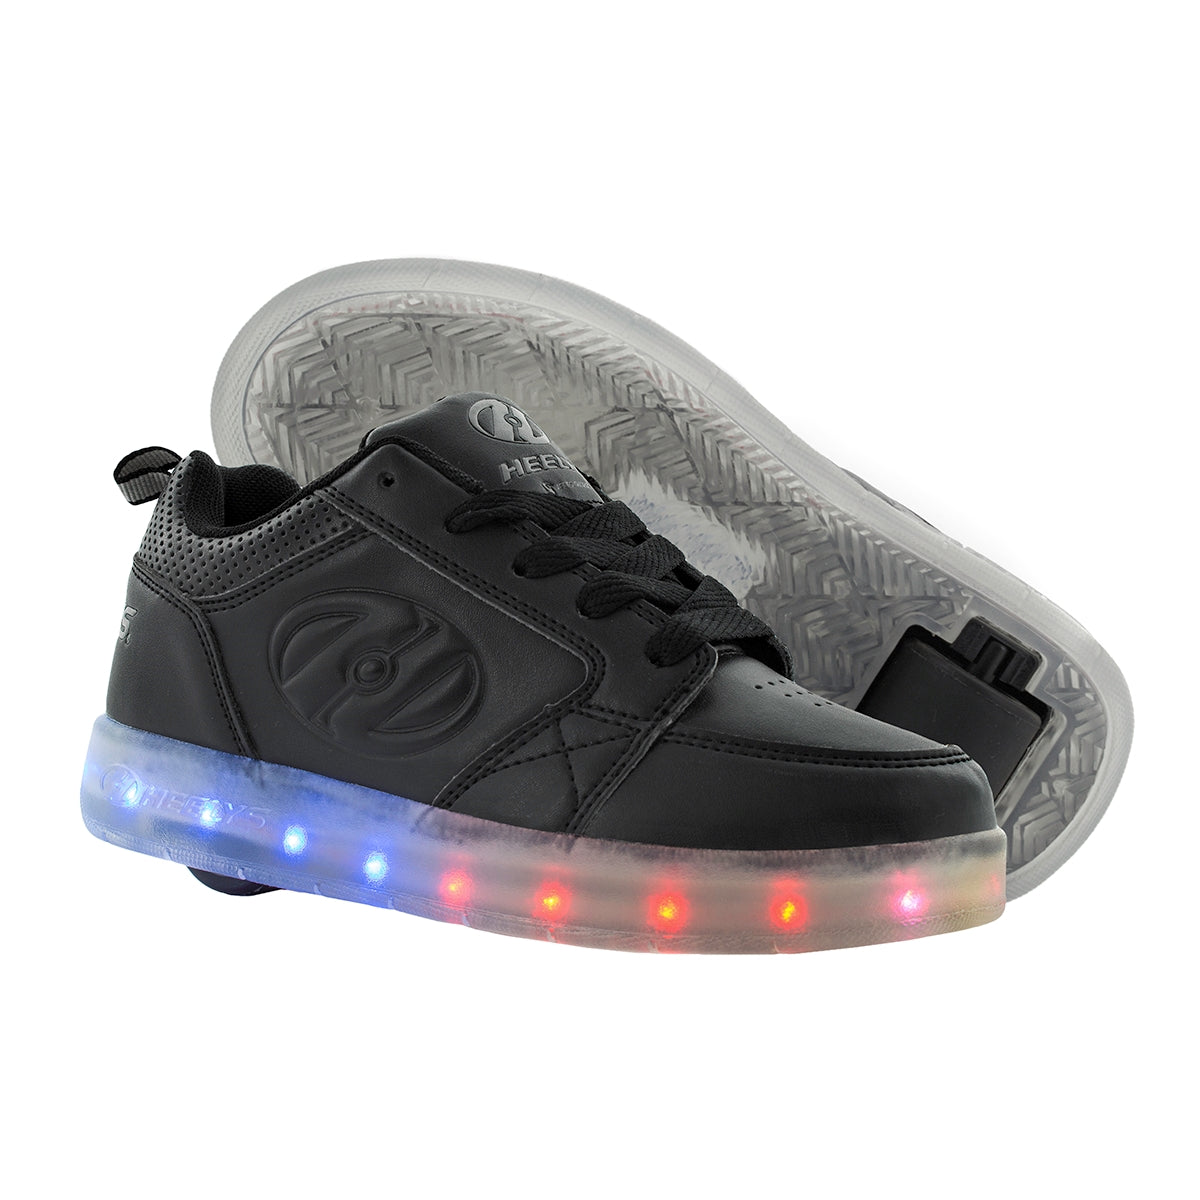 How to Charge Light Up Heelys?